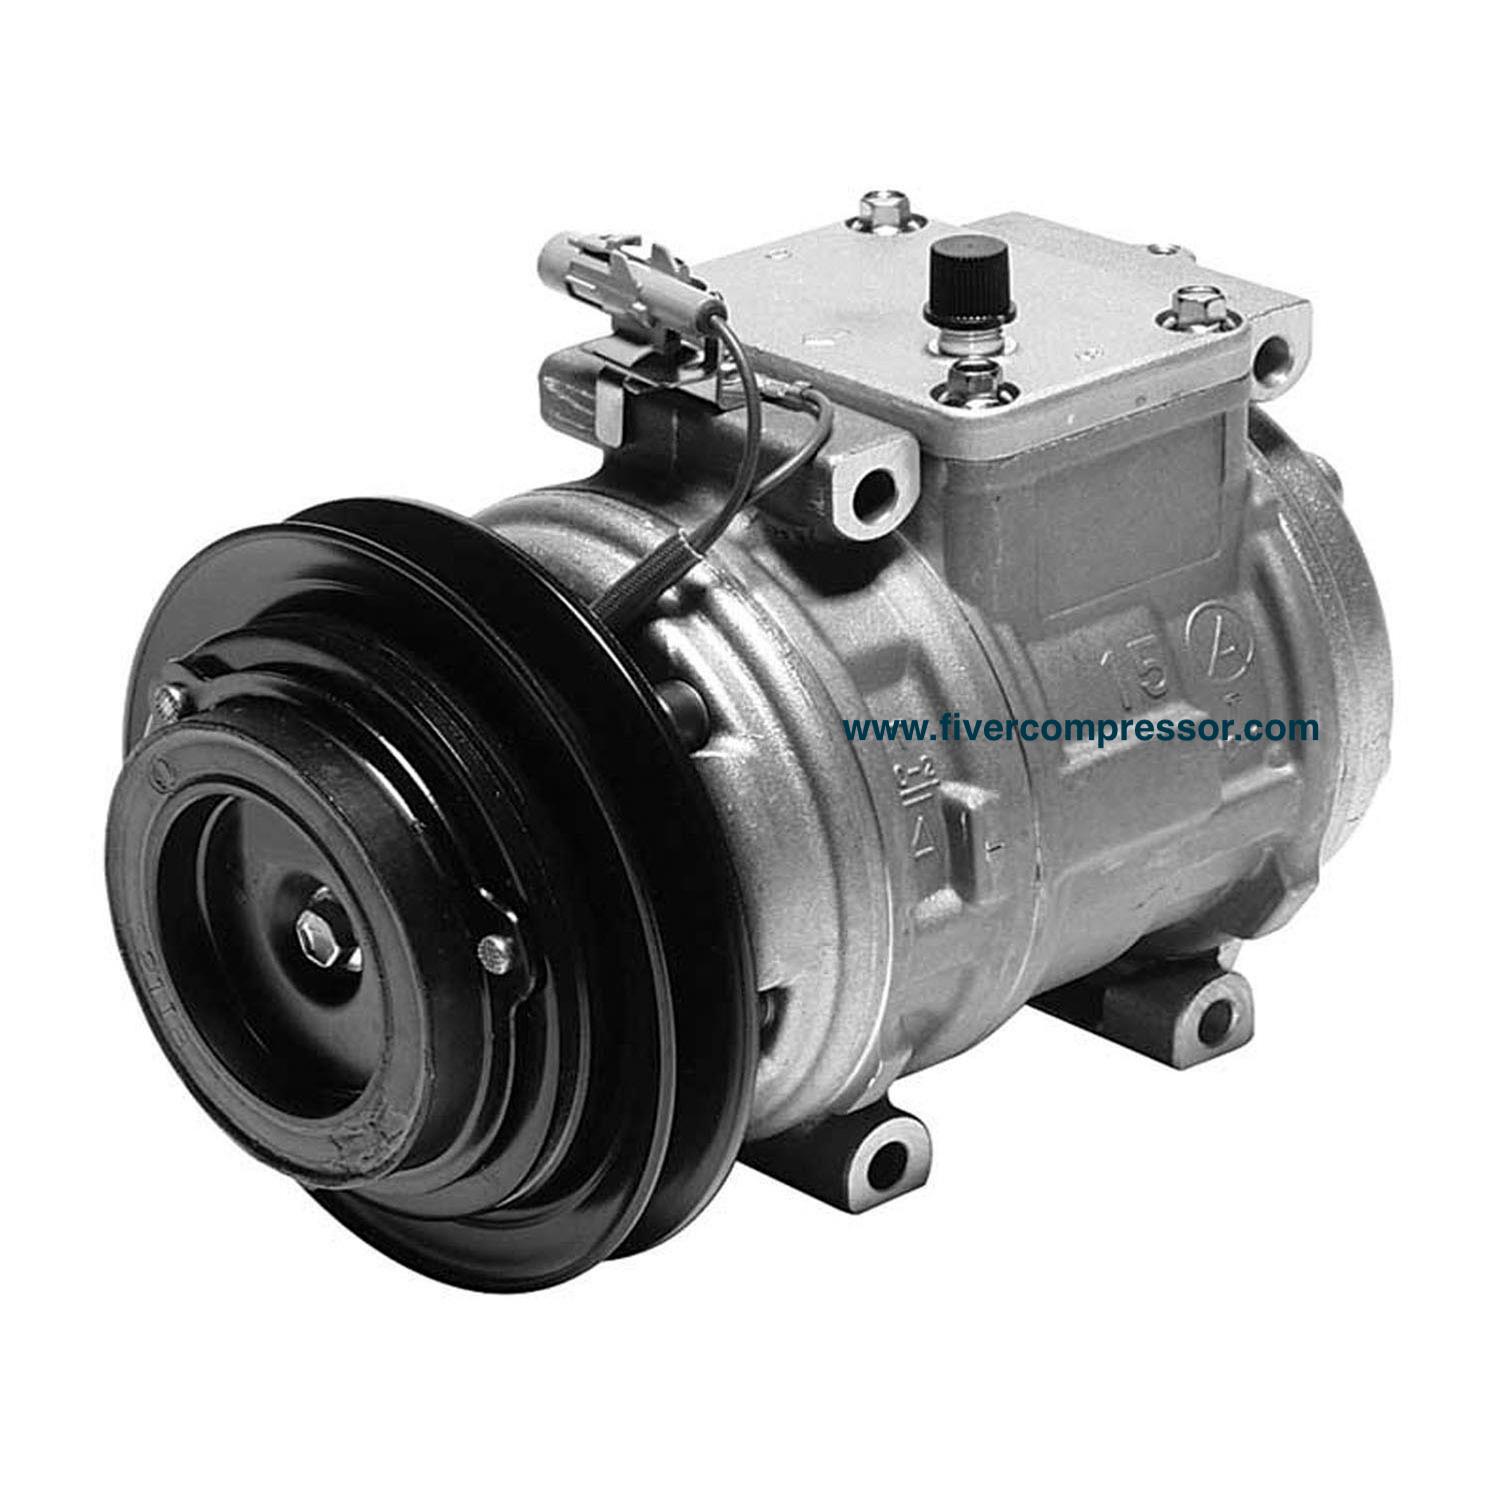 10PA15C 4PK AC Compressor Assy Cooler 4711169,883101A300, 8832002040, 883201A420, 8832034010 for Toyota Corolla AE101 ENGINE 4AFE 1.6L /AE102 ENGINE 7AFE 1.8L 1992-1997 